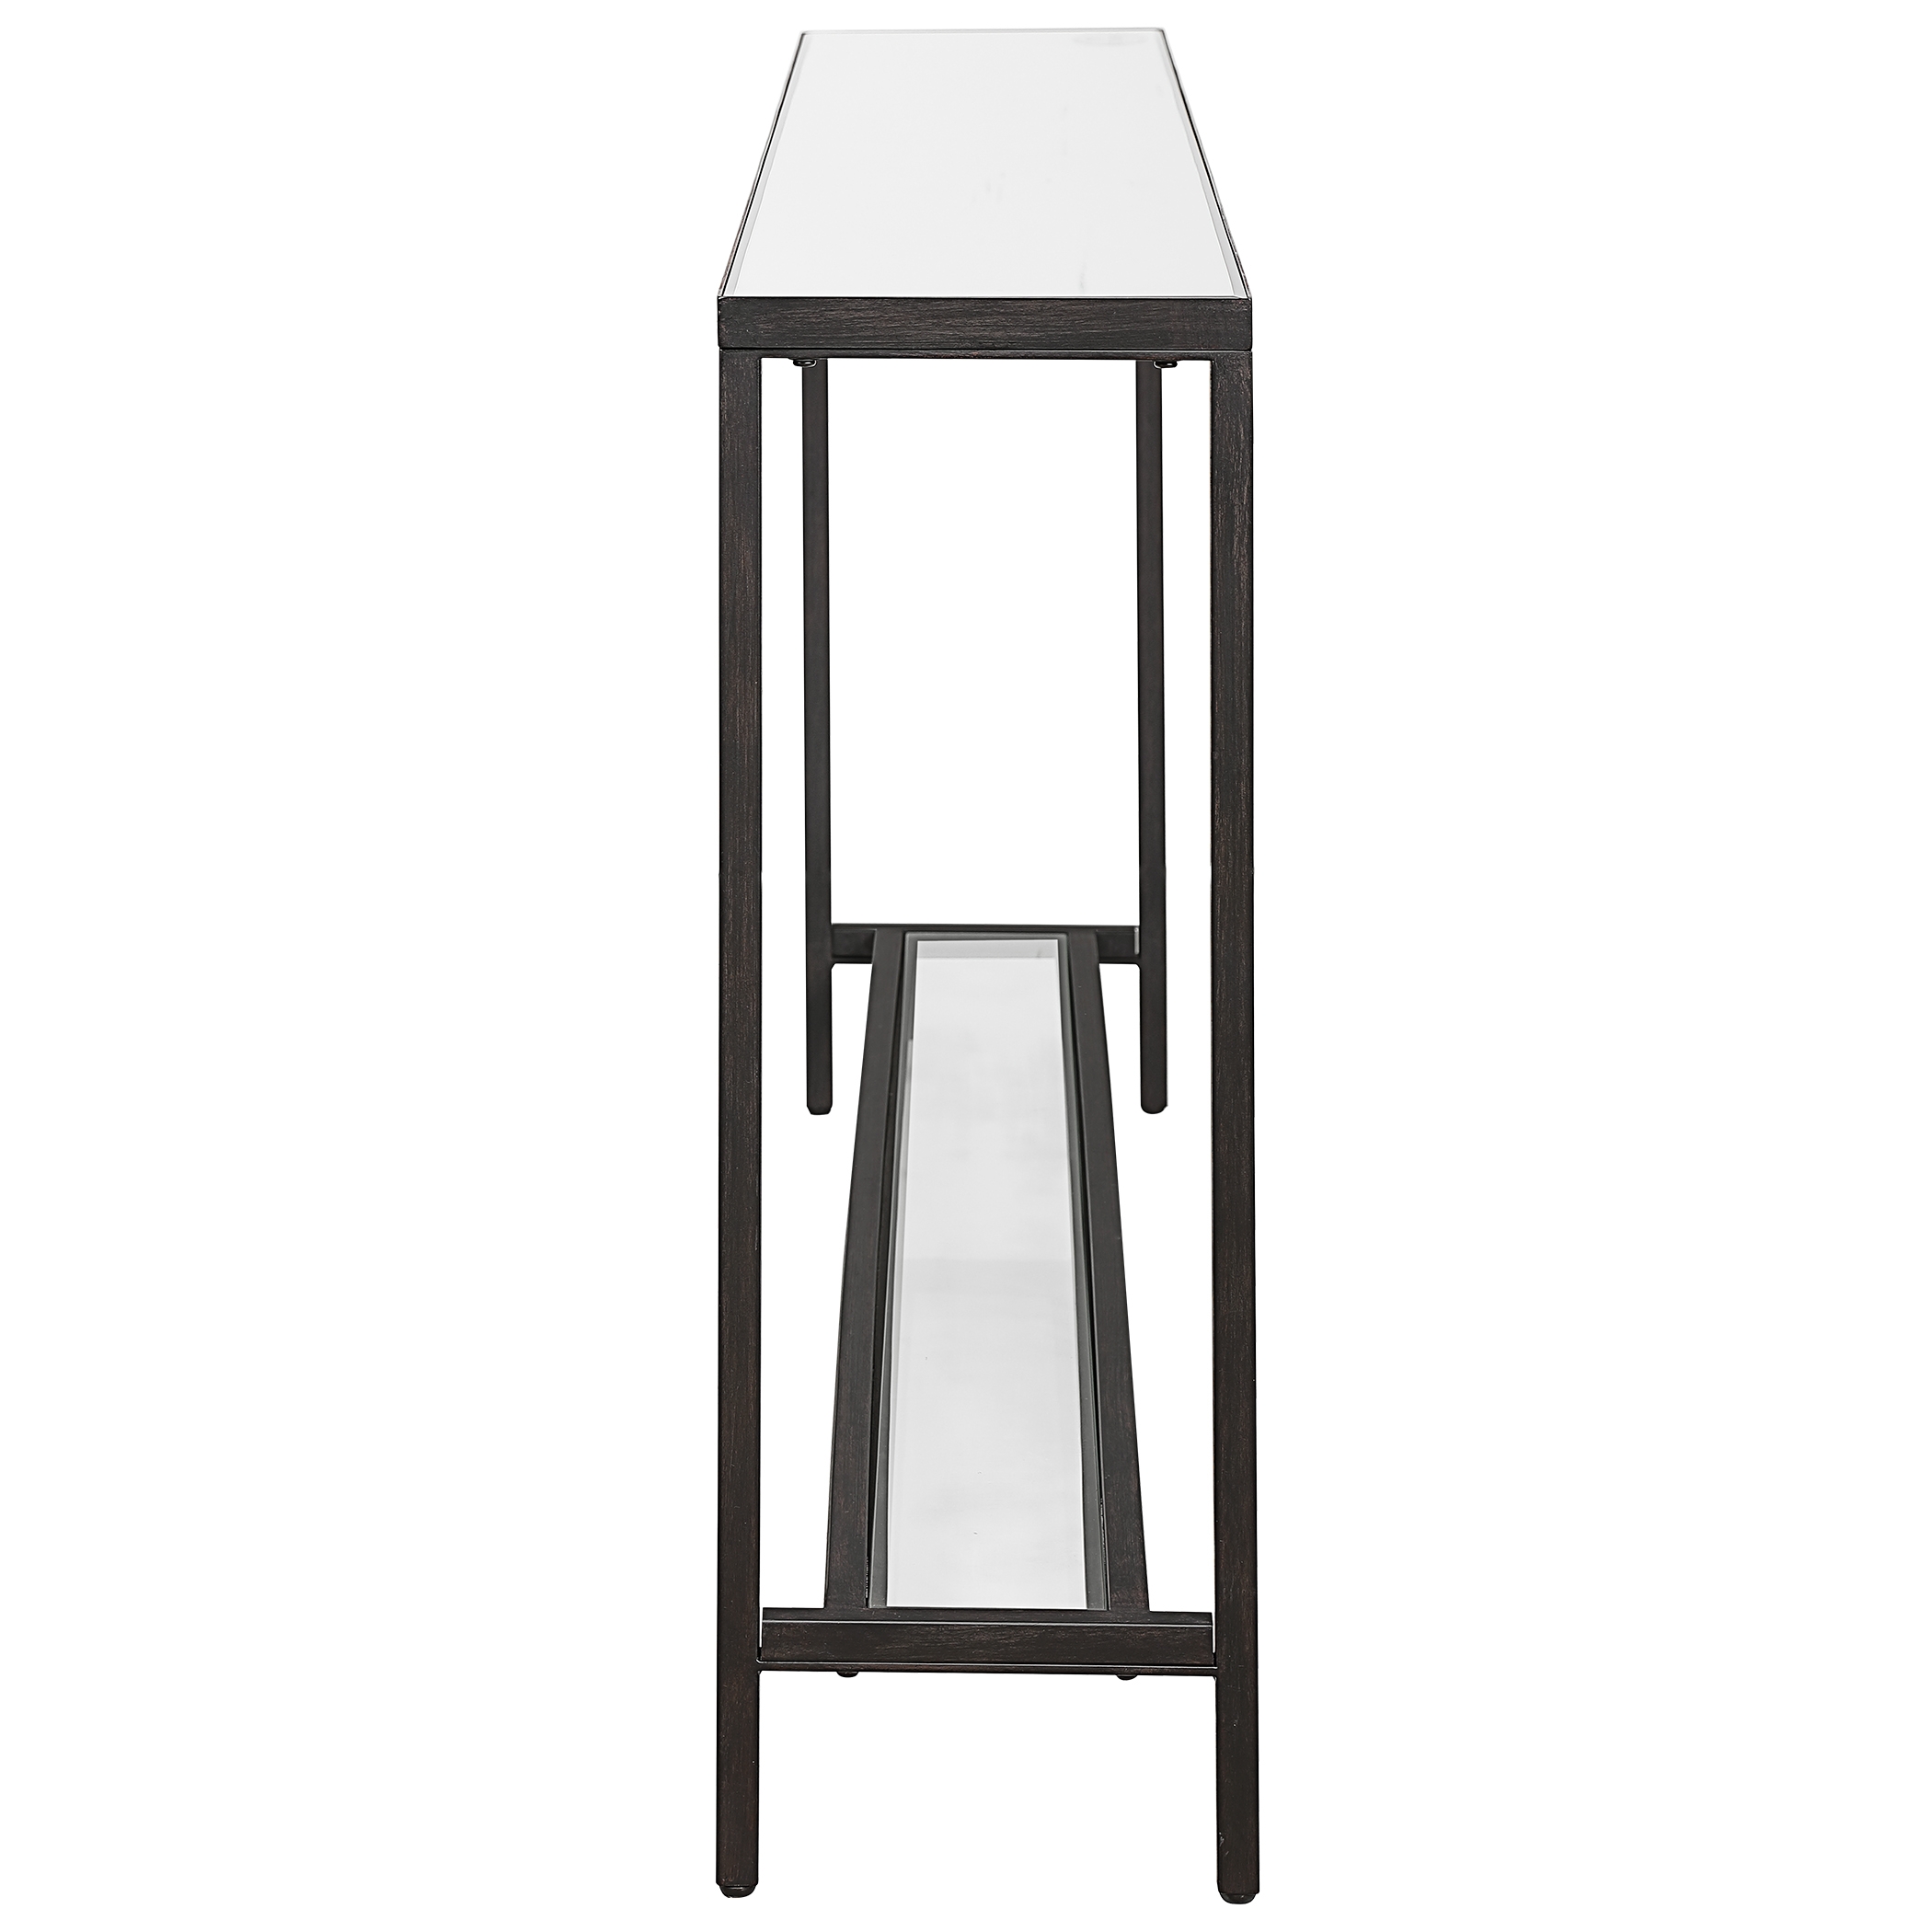 Hayley Console Table, Black - Image 2